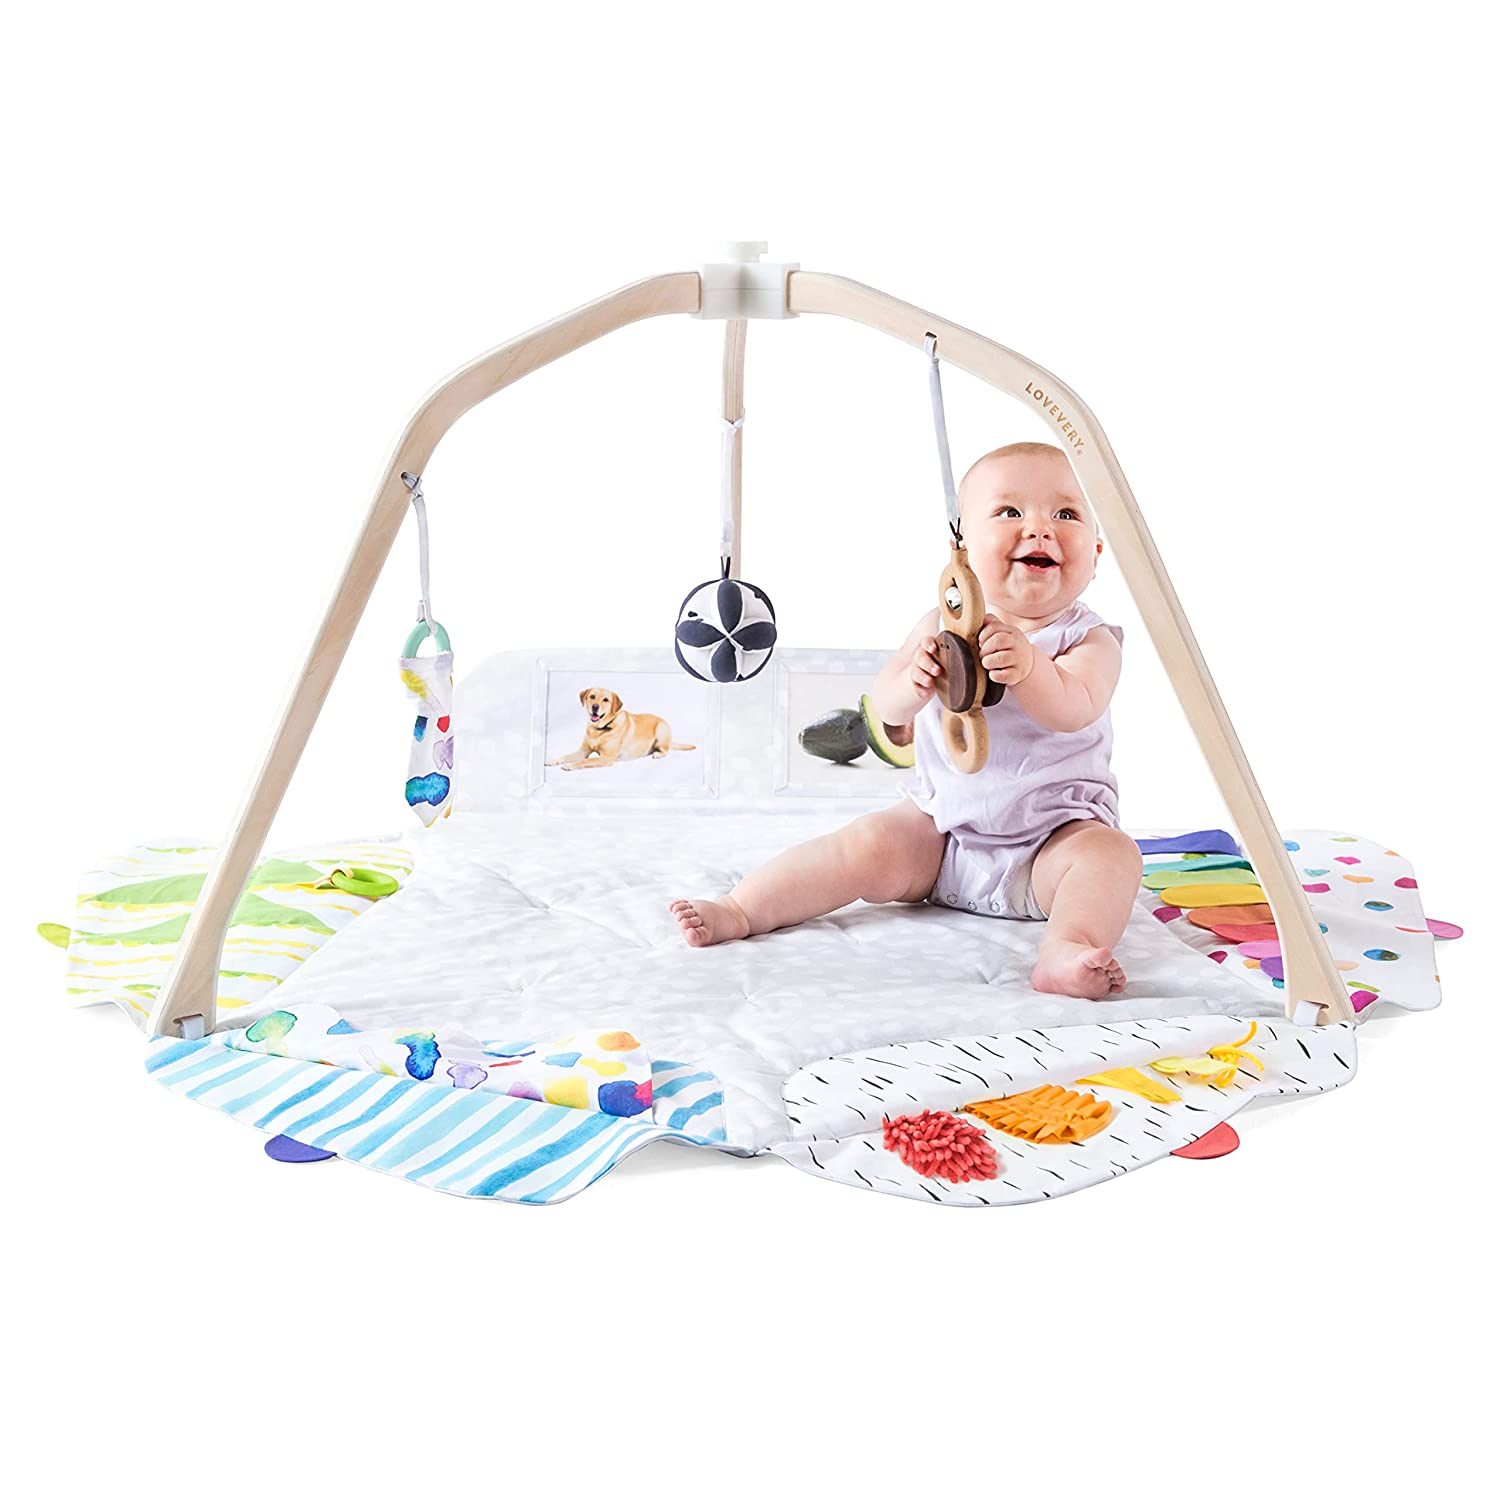 The Play Gym for babies 